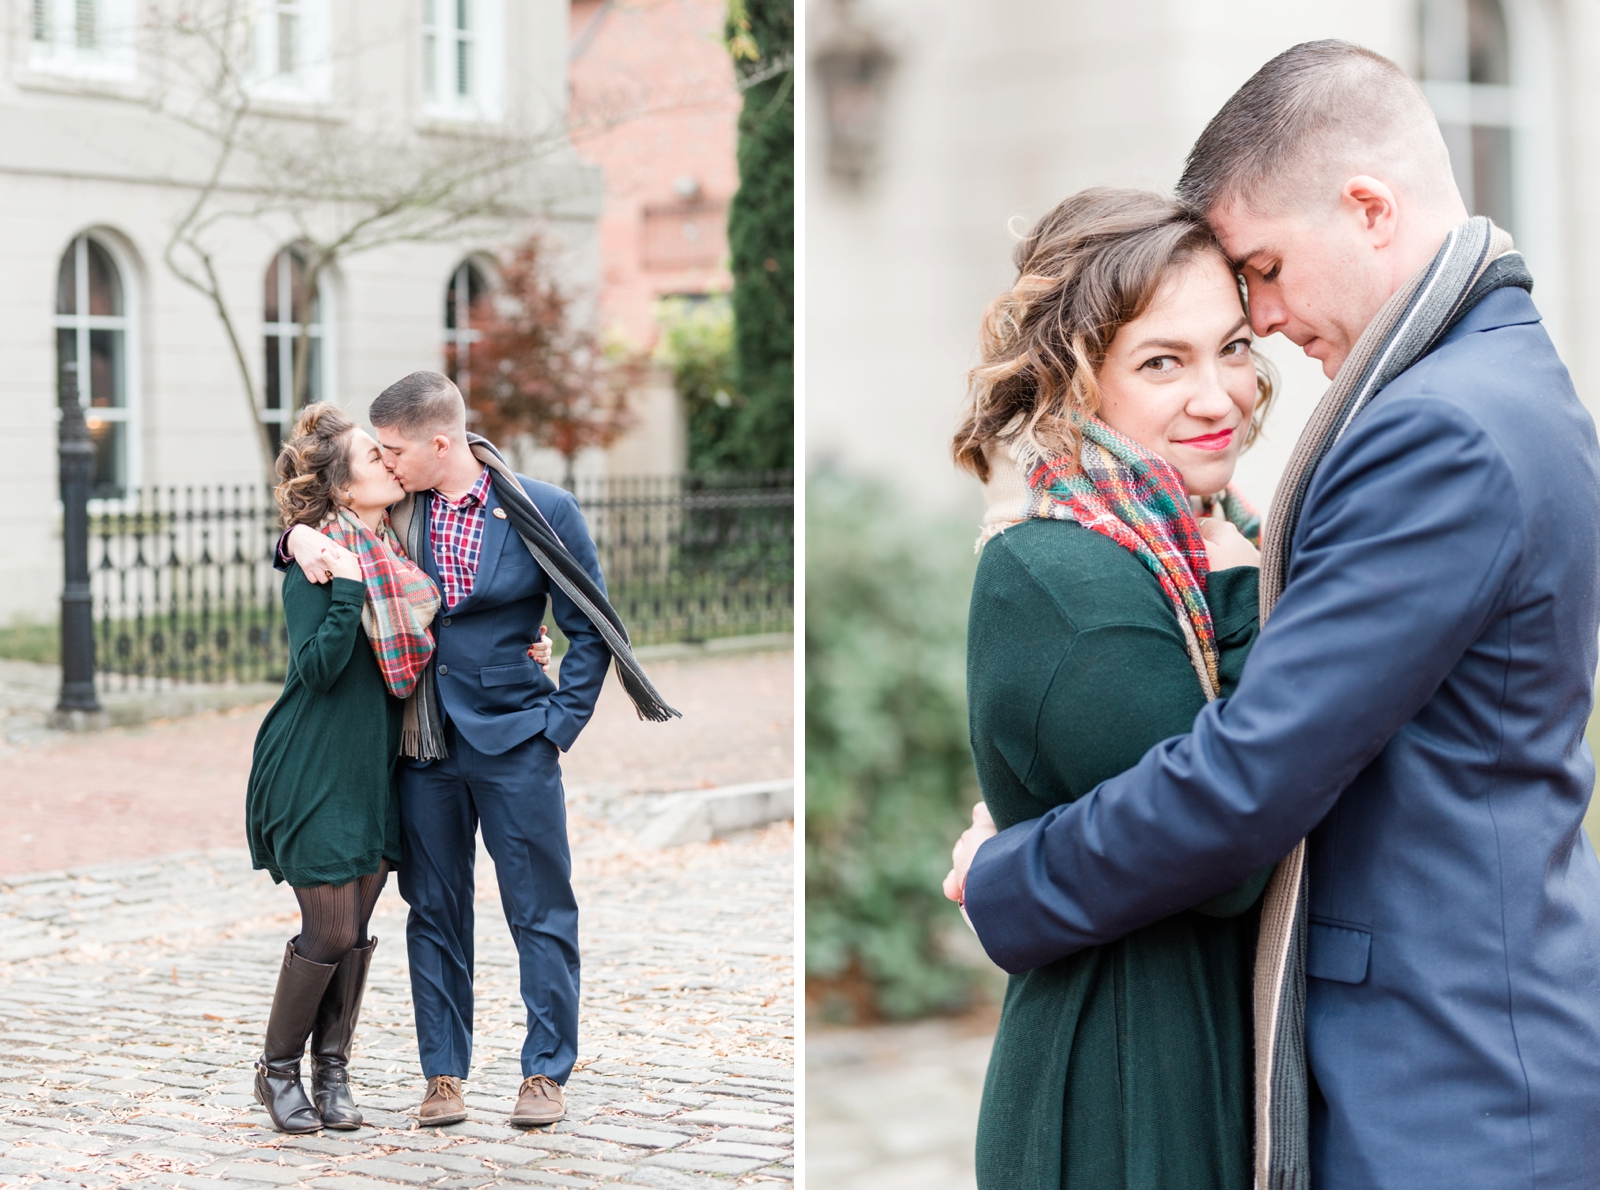 downtown-norfolk-winter-engagement-session-photo_7243.jpg